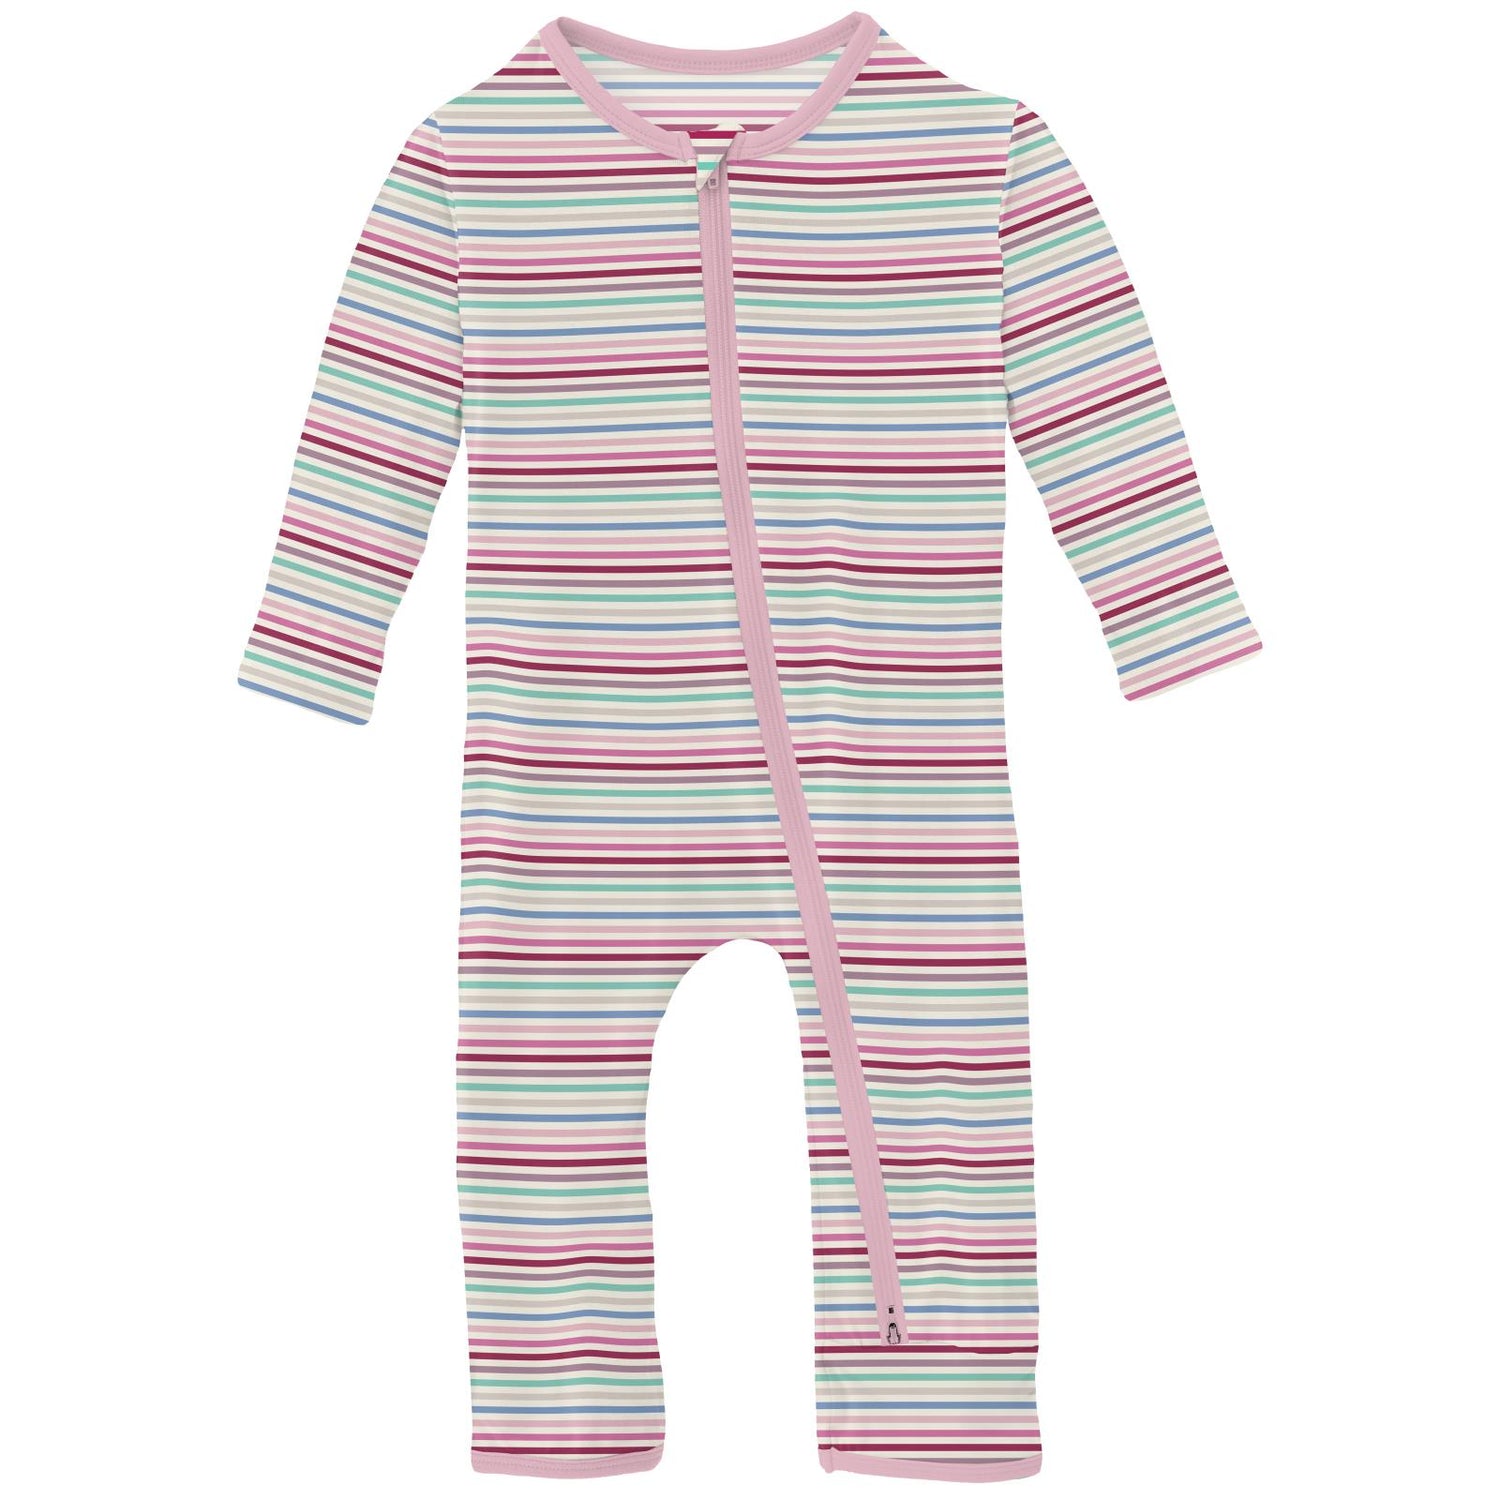 Print Coverall with 2 Way Zipper in Make Believe Stripe